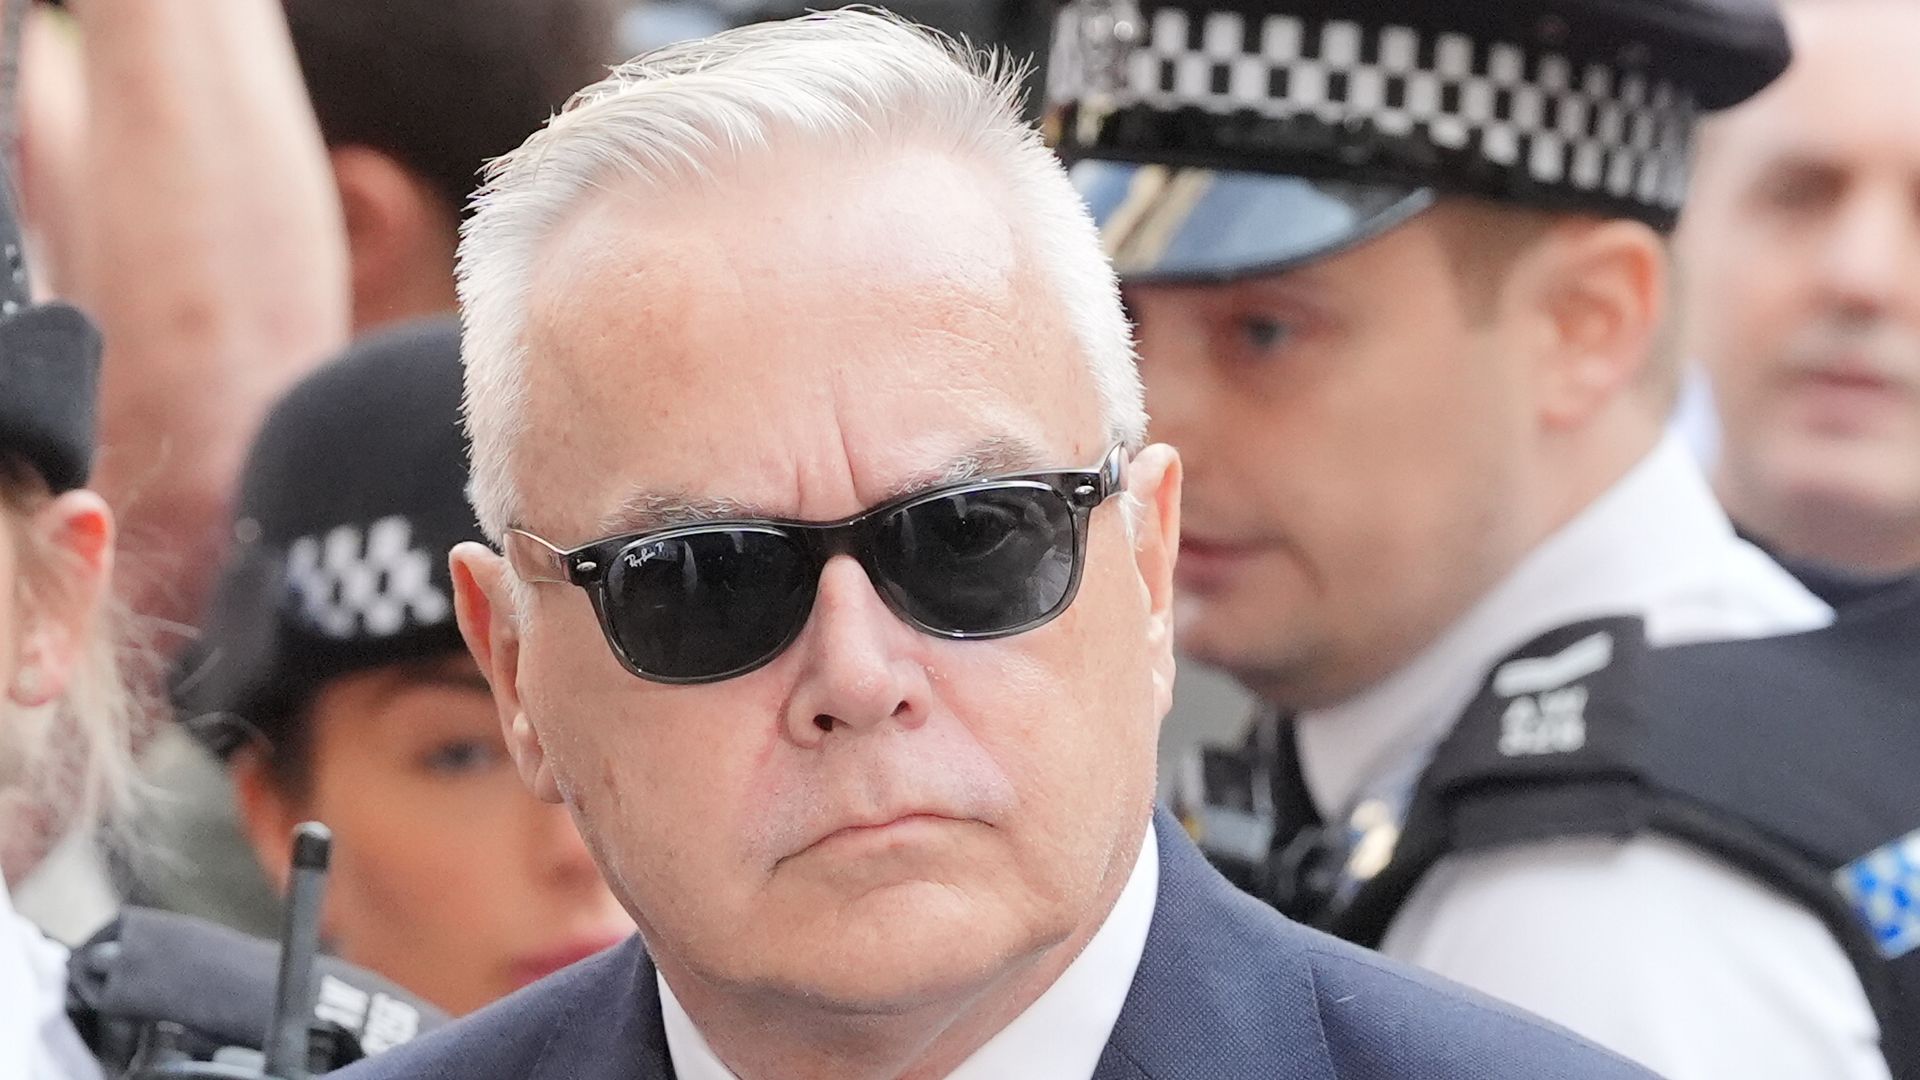 Teen who Huw Edwards allegedly paid for explicit photos felt 'groomed'